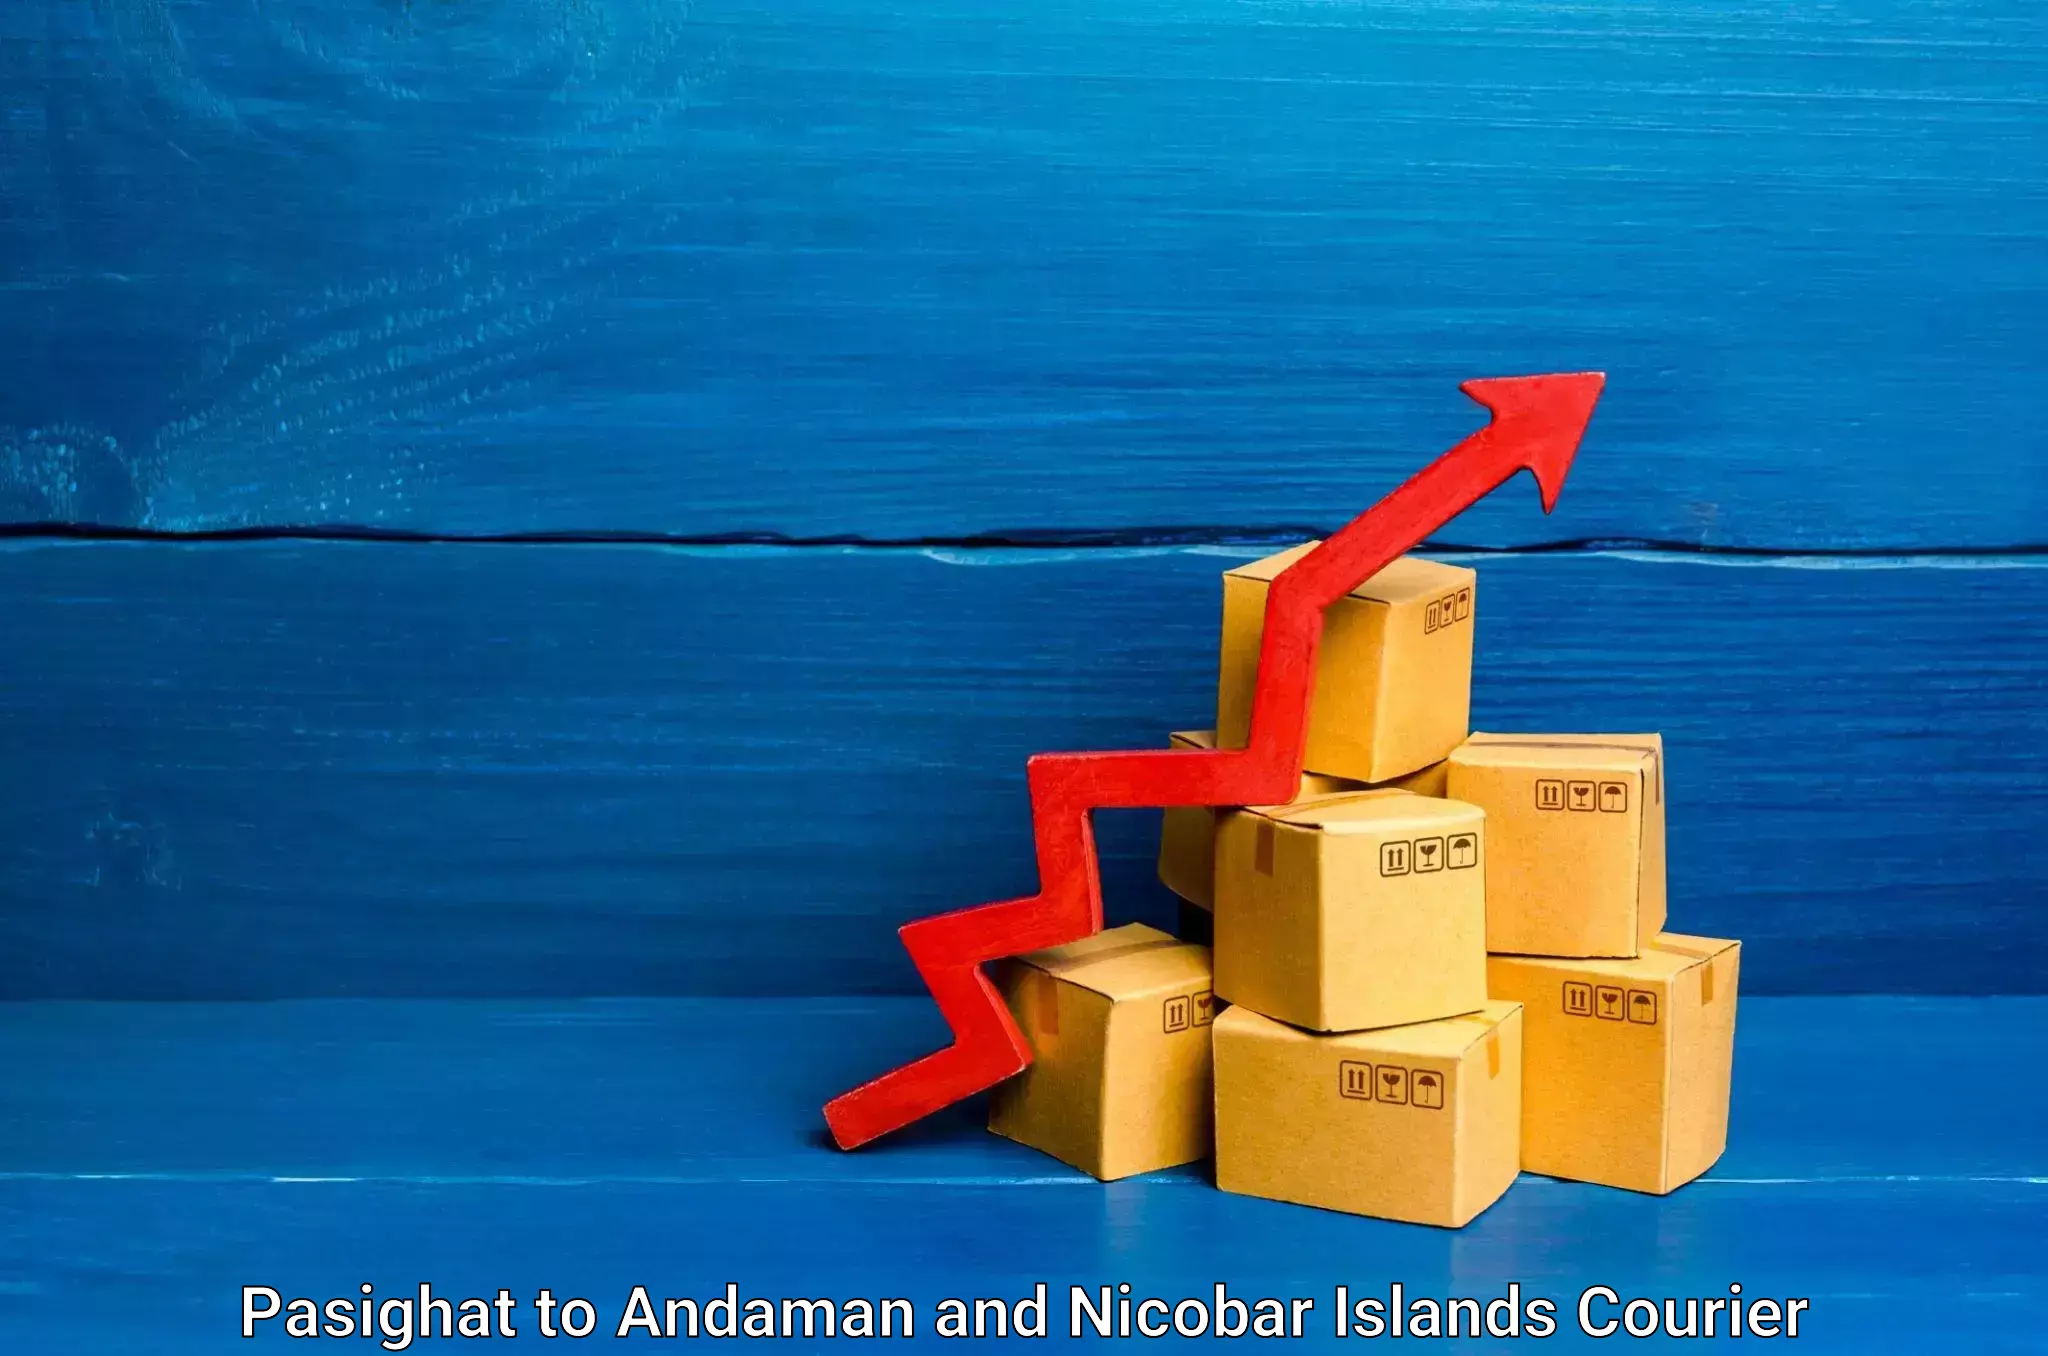 Comprehensive parcel tracking Pasighat to Andaman and Nicobar Islands